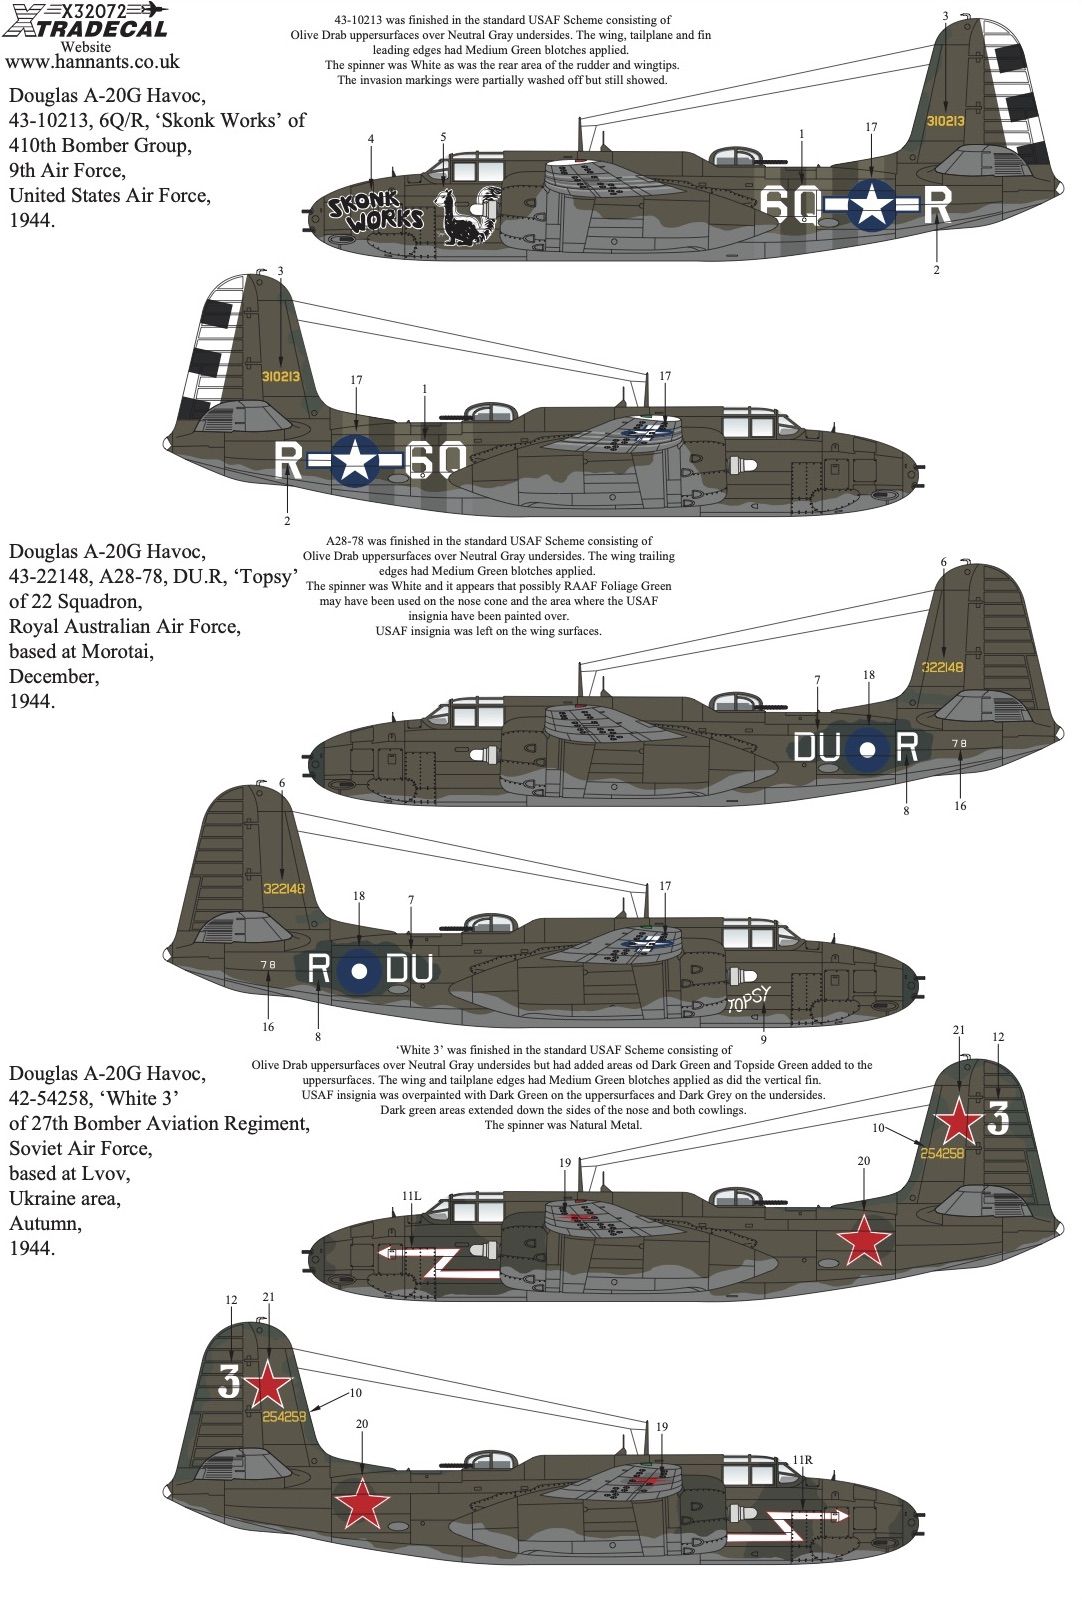 Xtradecal X32072 Douglas A-20G Havoc Collection Decals 1/32